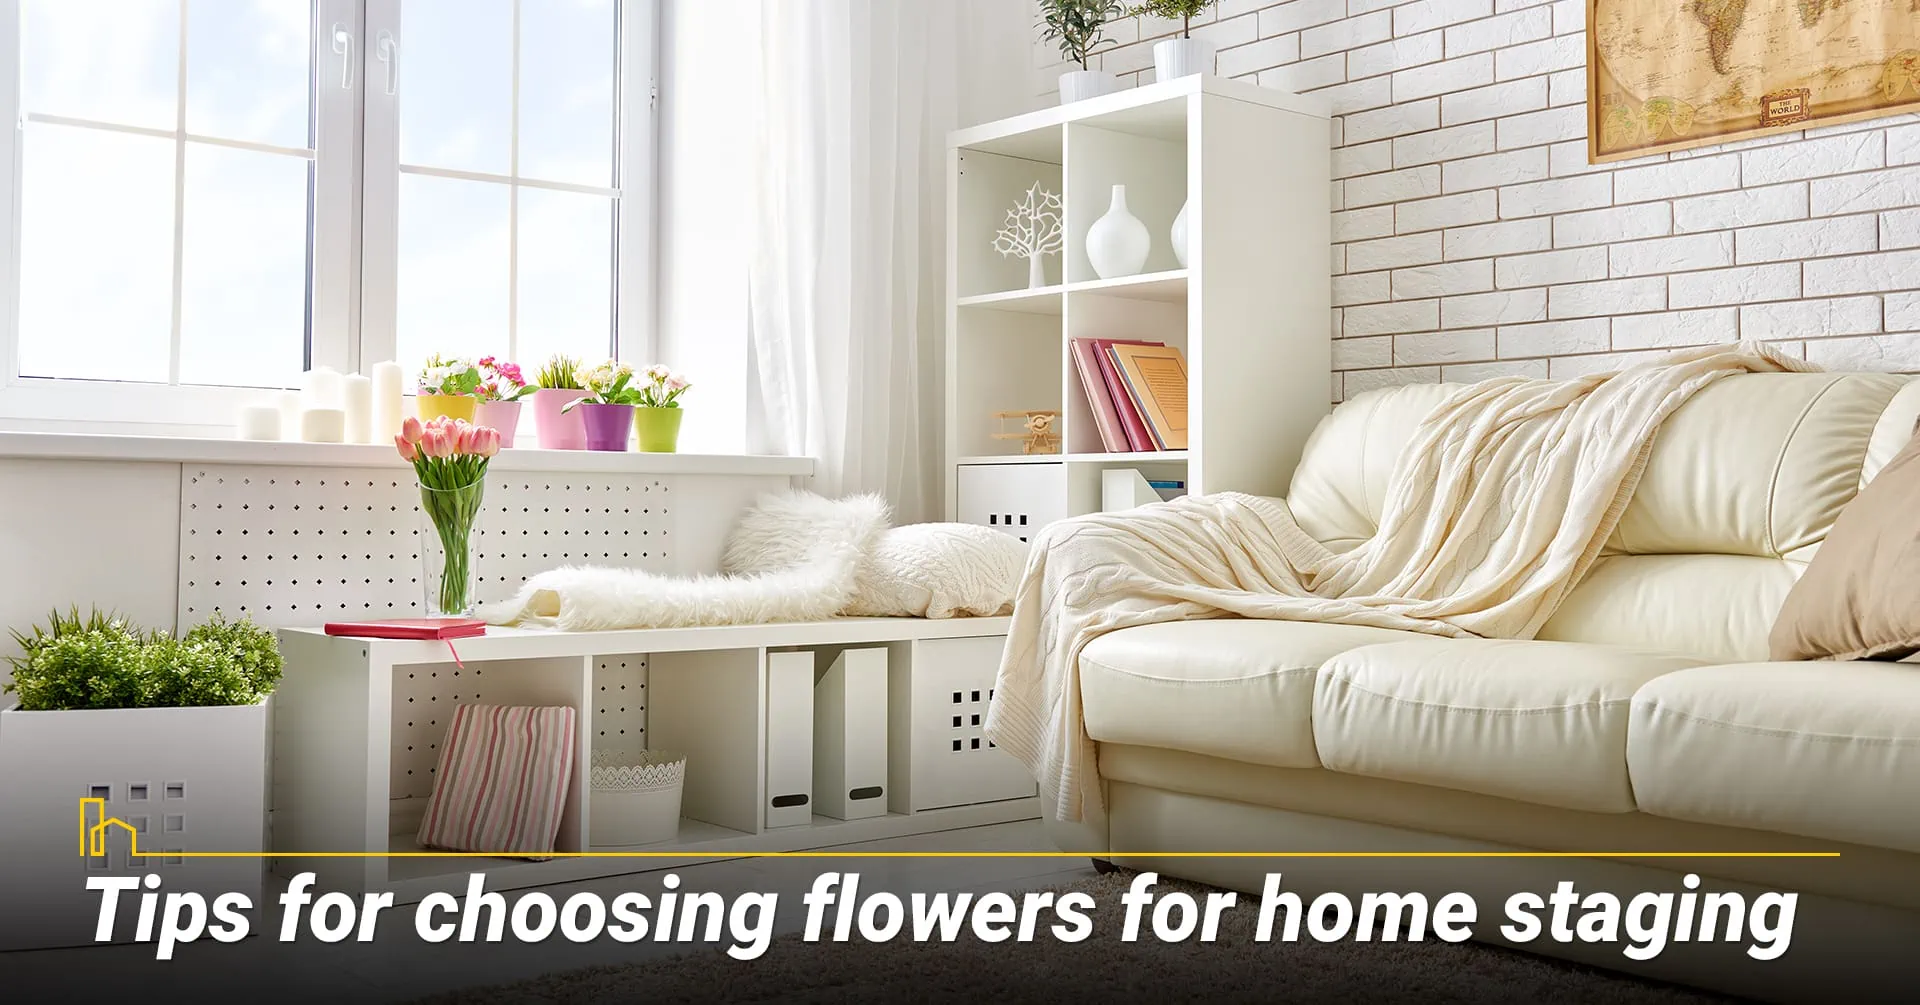 3. Tips for choosing flowers for home staging